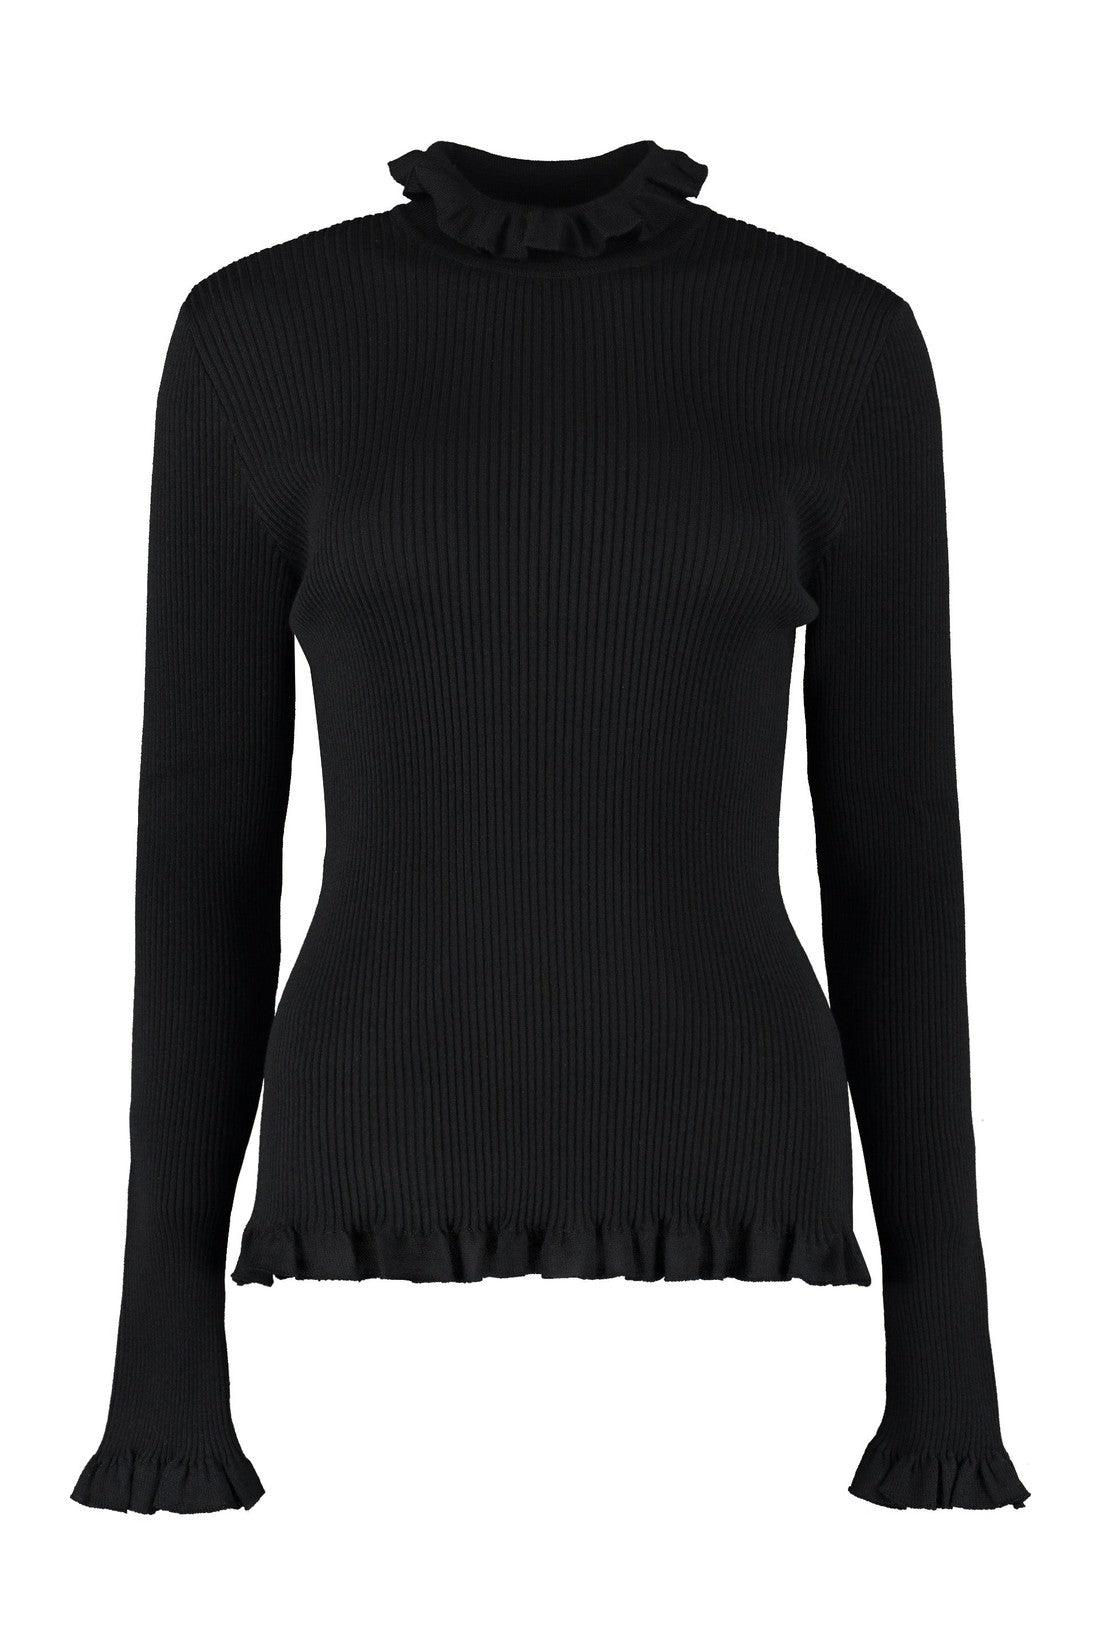 Boutique Moschino-OUTLET-SALE-Ribbed turtleneck sweater-ARCHIVIST